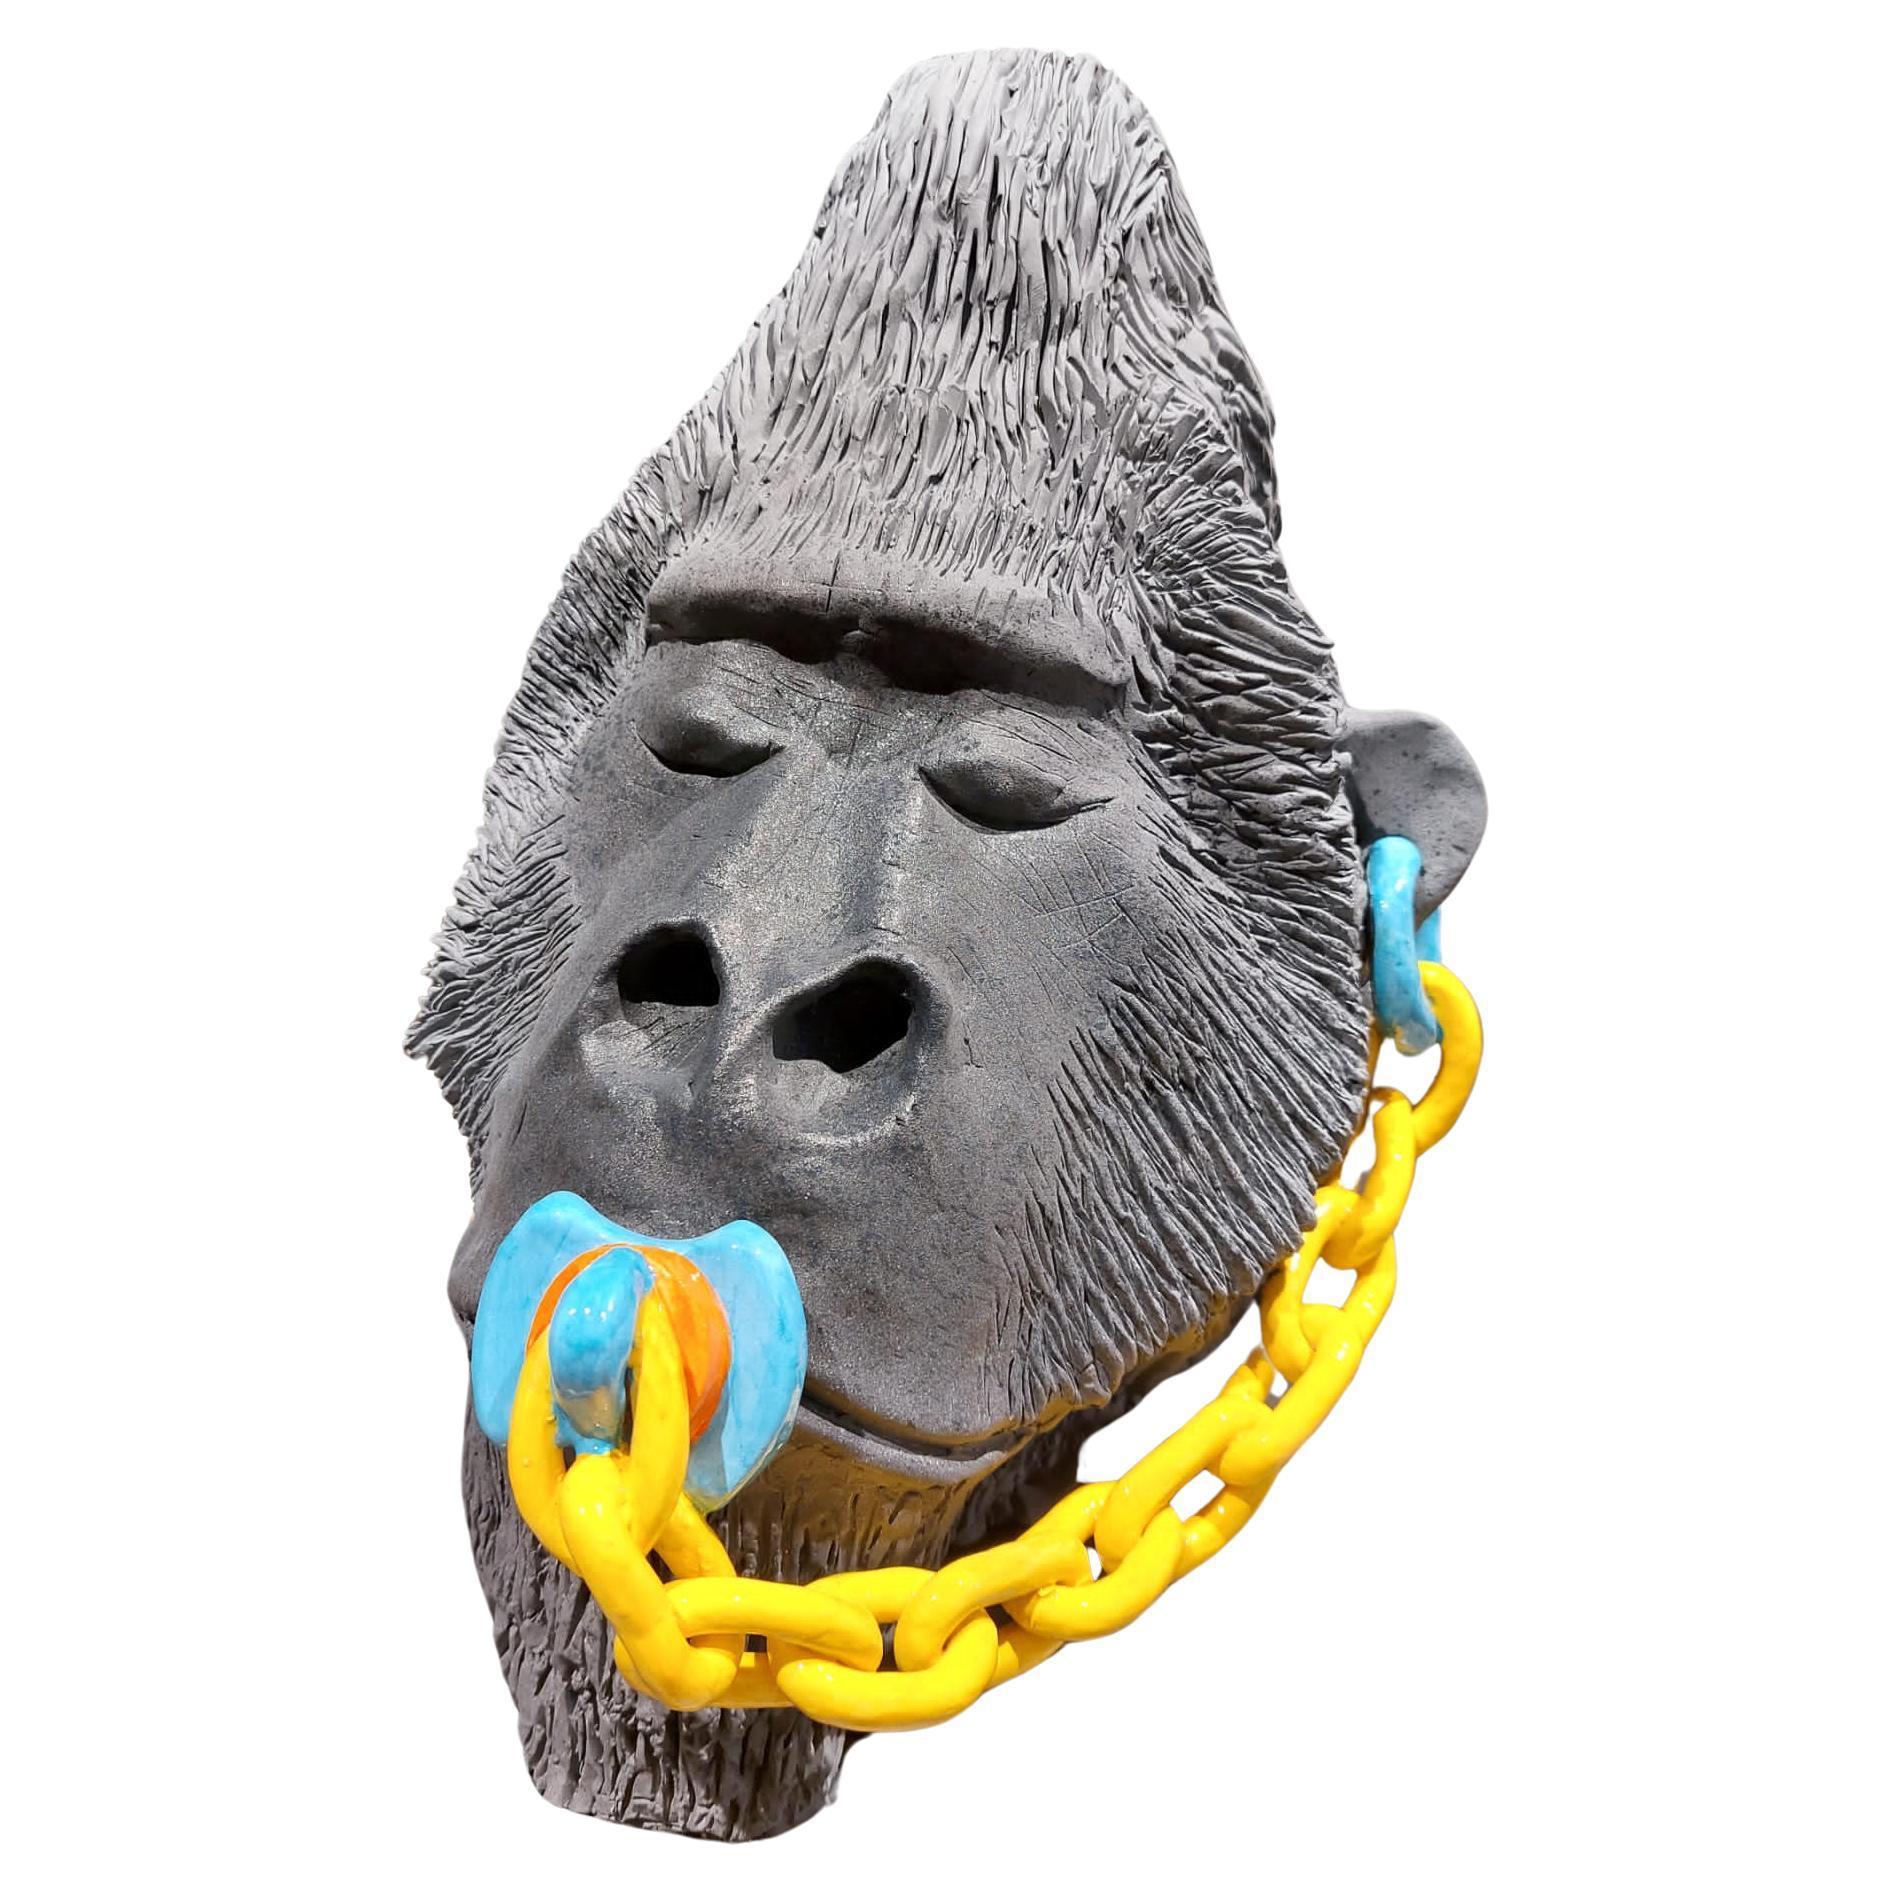 Baby Gorilla Pacifier Ceramic Centerpiece Handmade in Italy Without Mold, 2023 For Sale